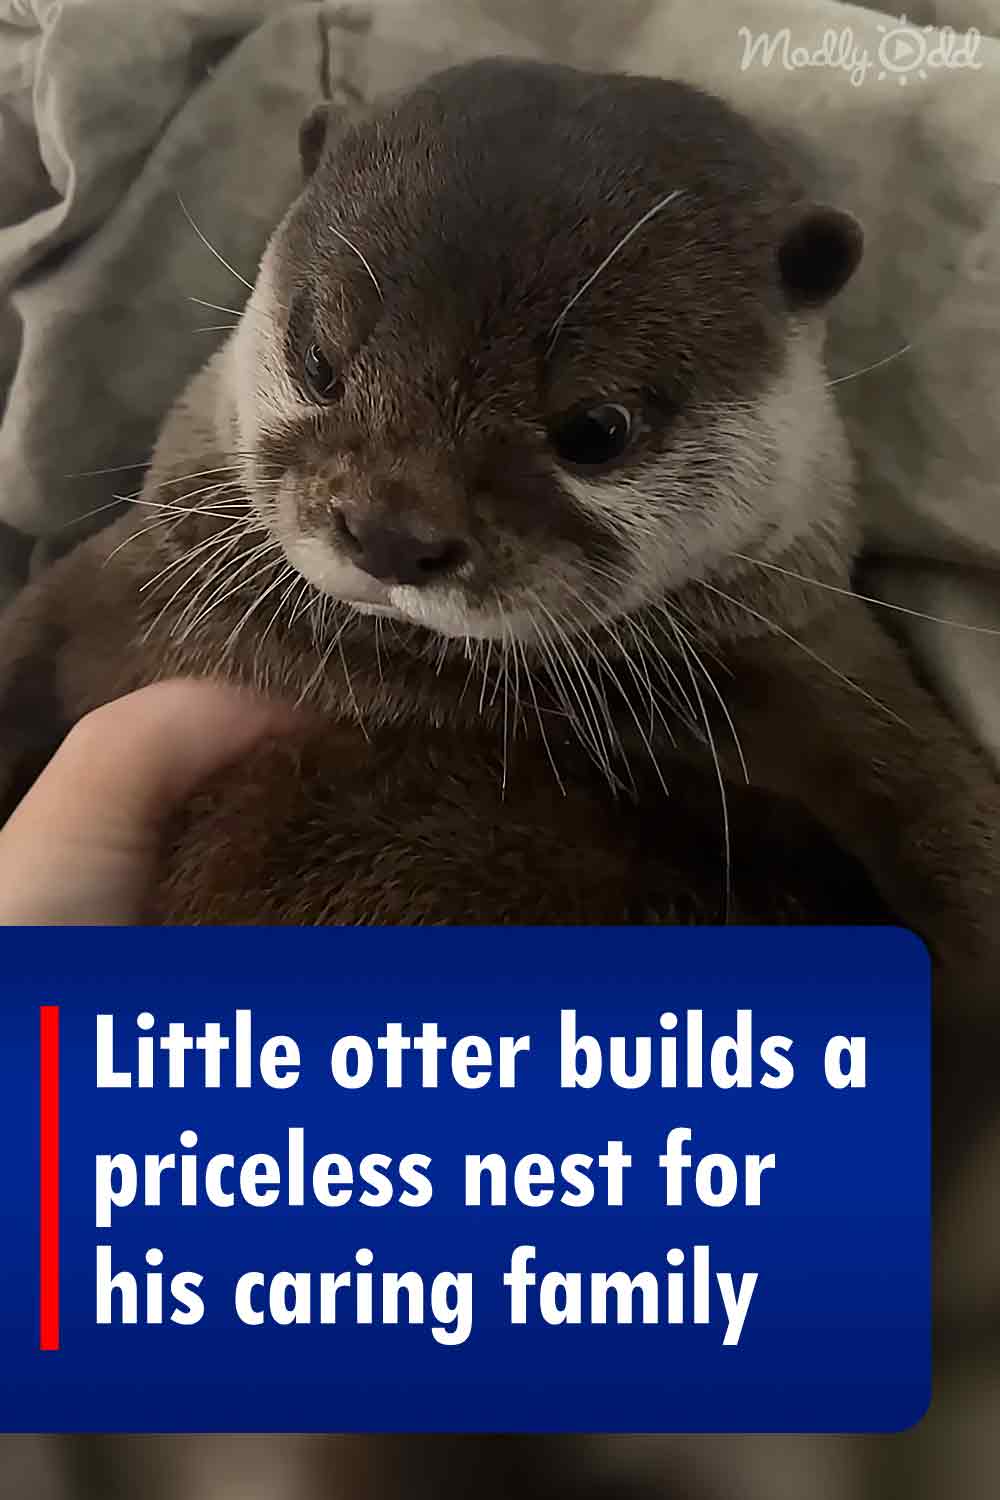 Little otter builds a priceless nest for his caring family